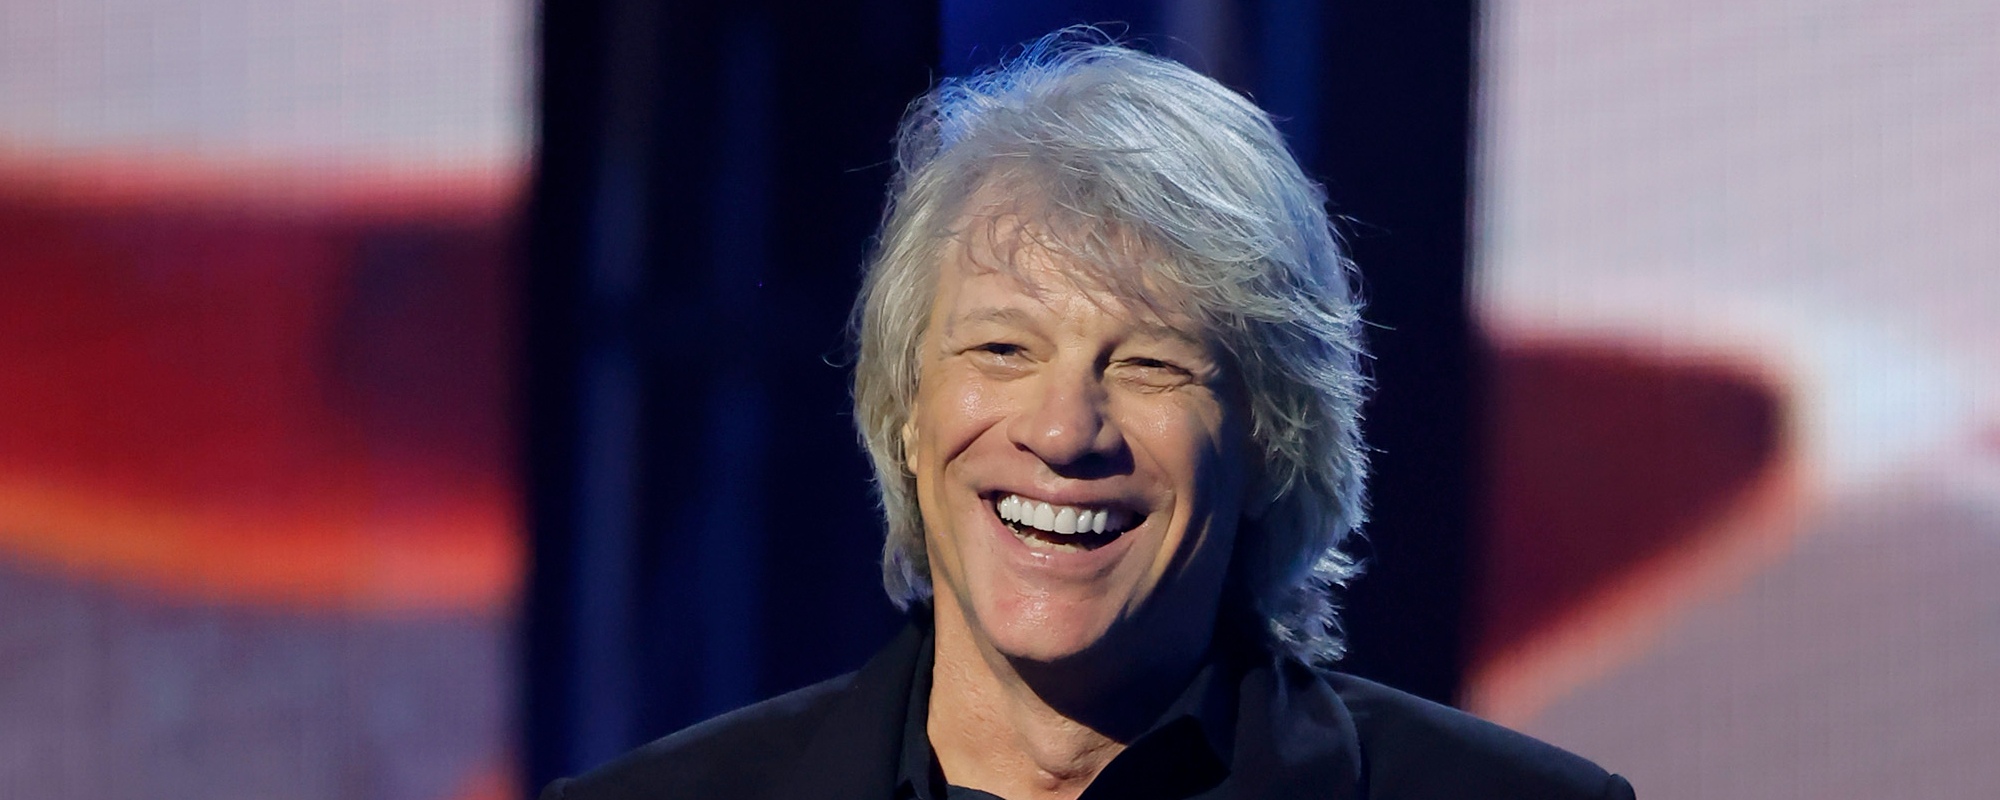 Jon Bon Jovi, Pearl Jam, and Many More Speak out on the Dangers of AI and Human Creativity